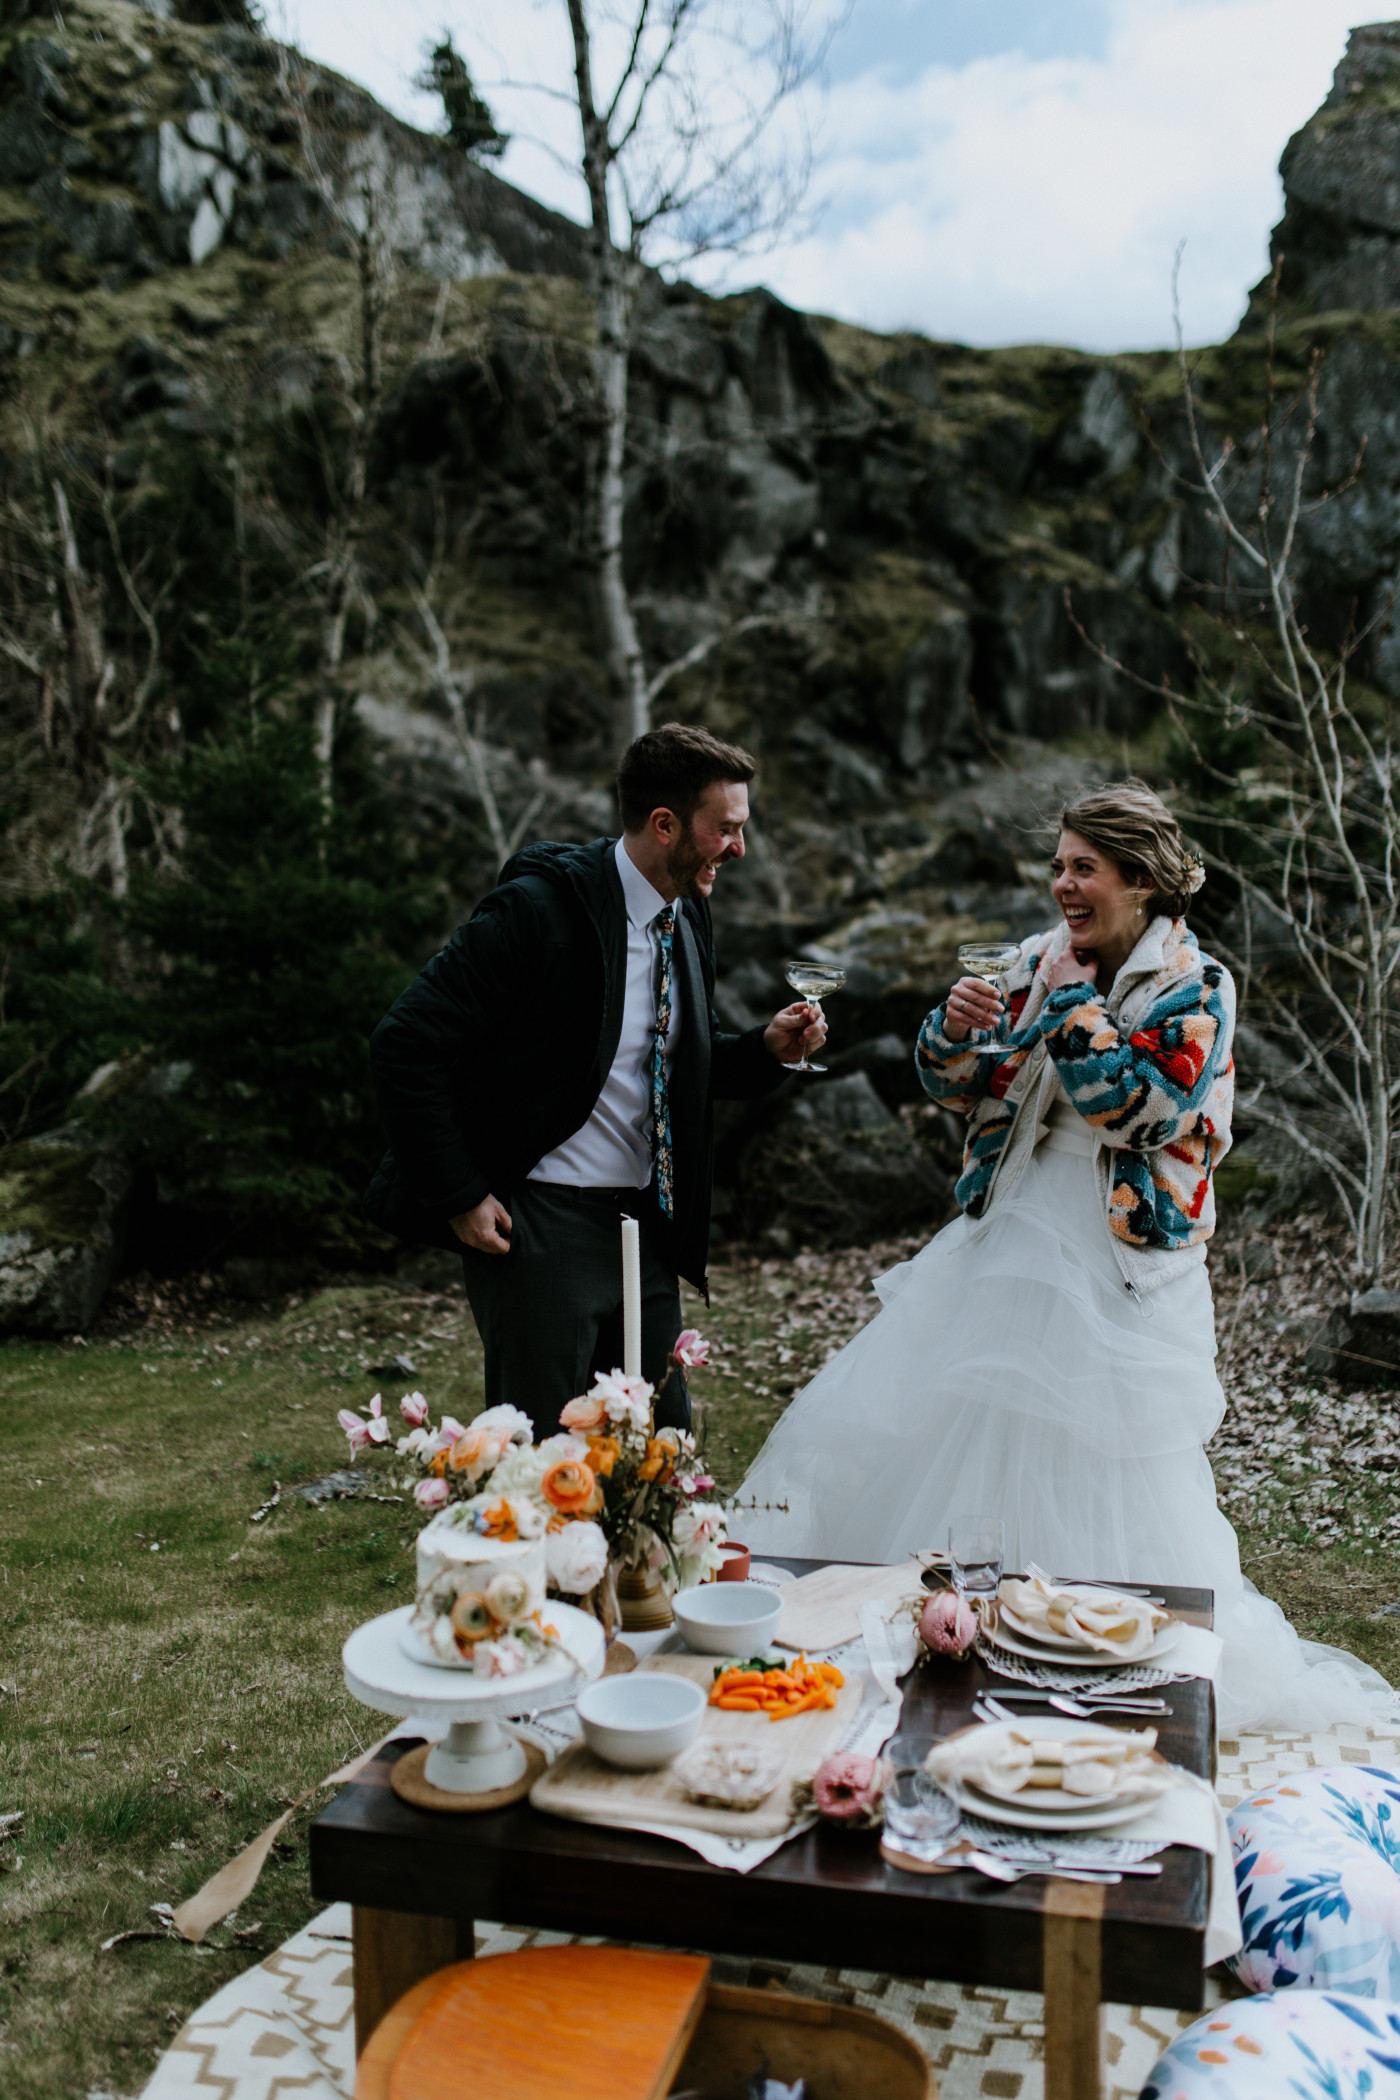 Allison and Lennie toast. Elopement photography at Columbia River Gorge by Sienna Plus Josh.